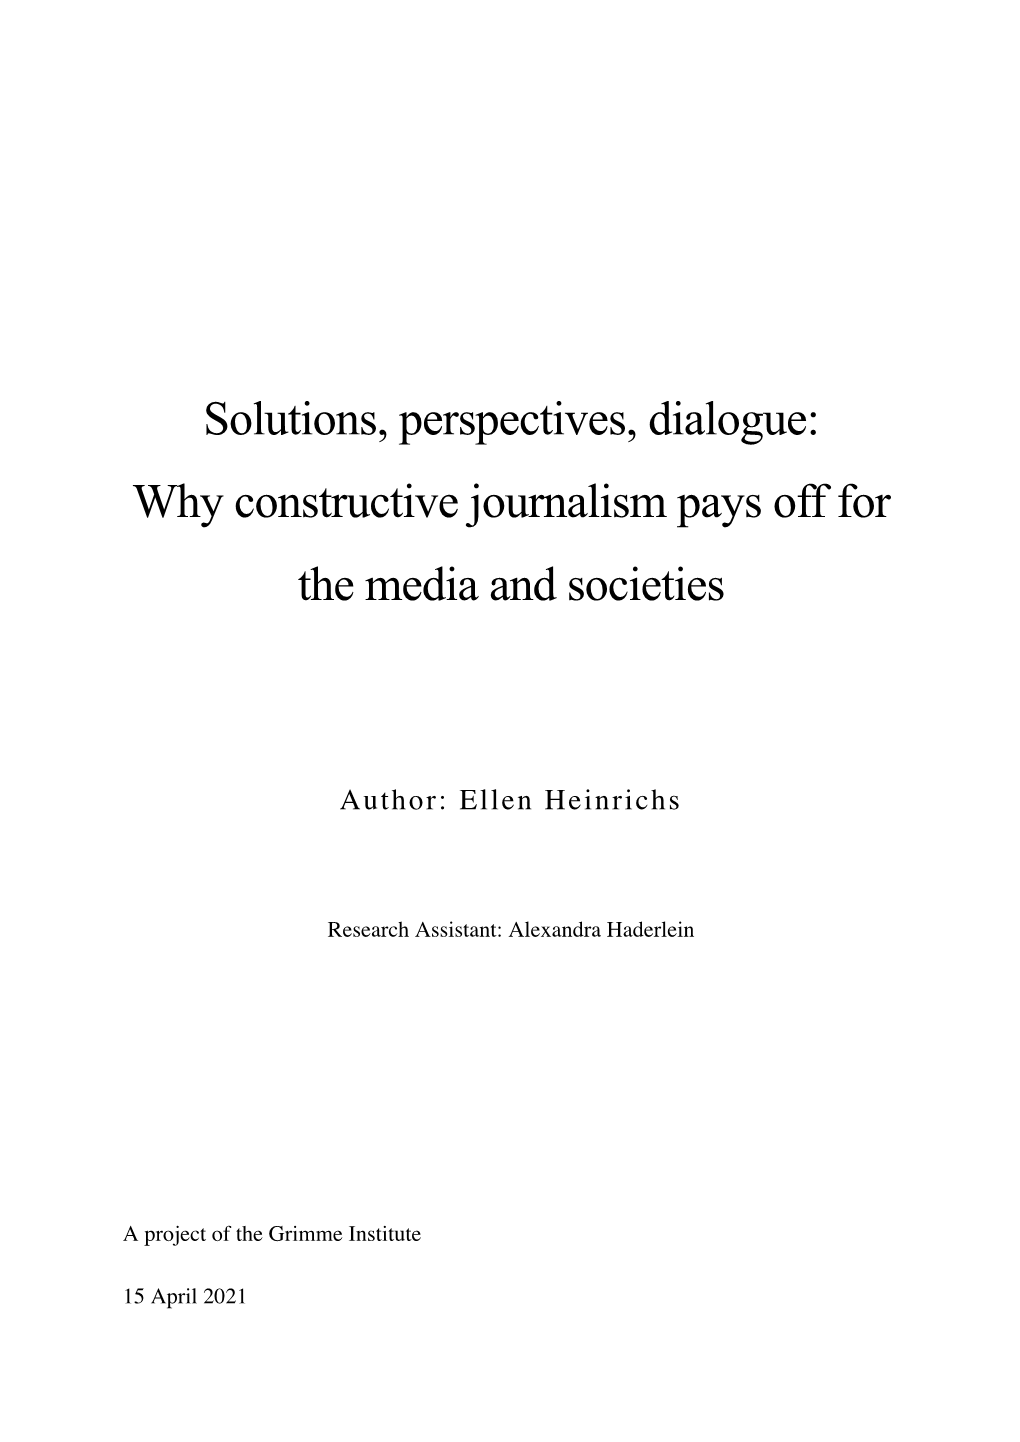 Solutions, Perspectives, Dialogue: Why Constructive Journalism Pays Off for the Media and Societies